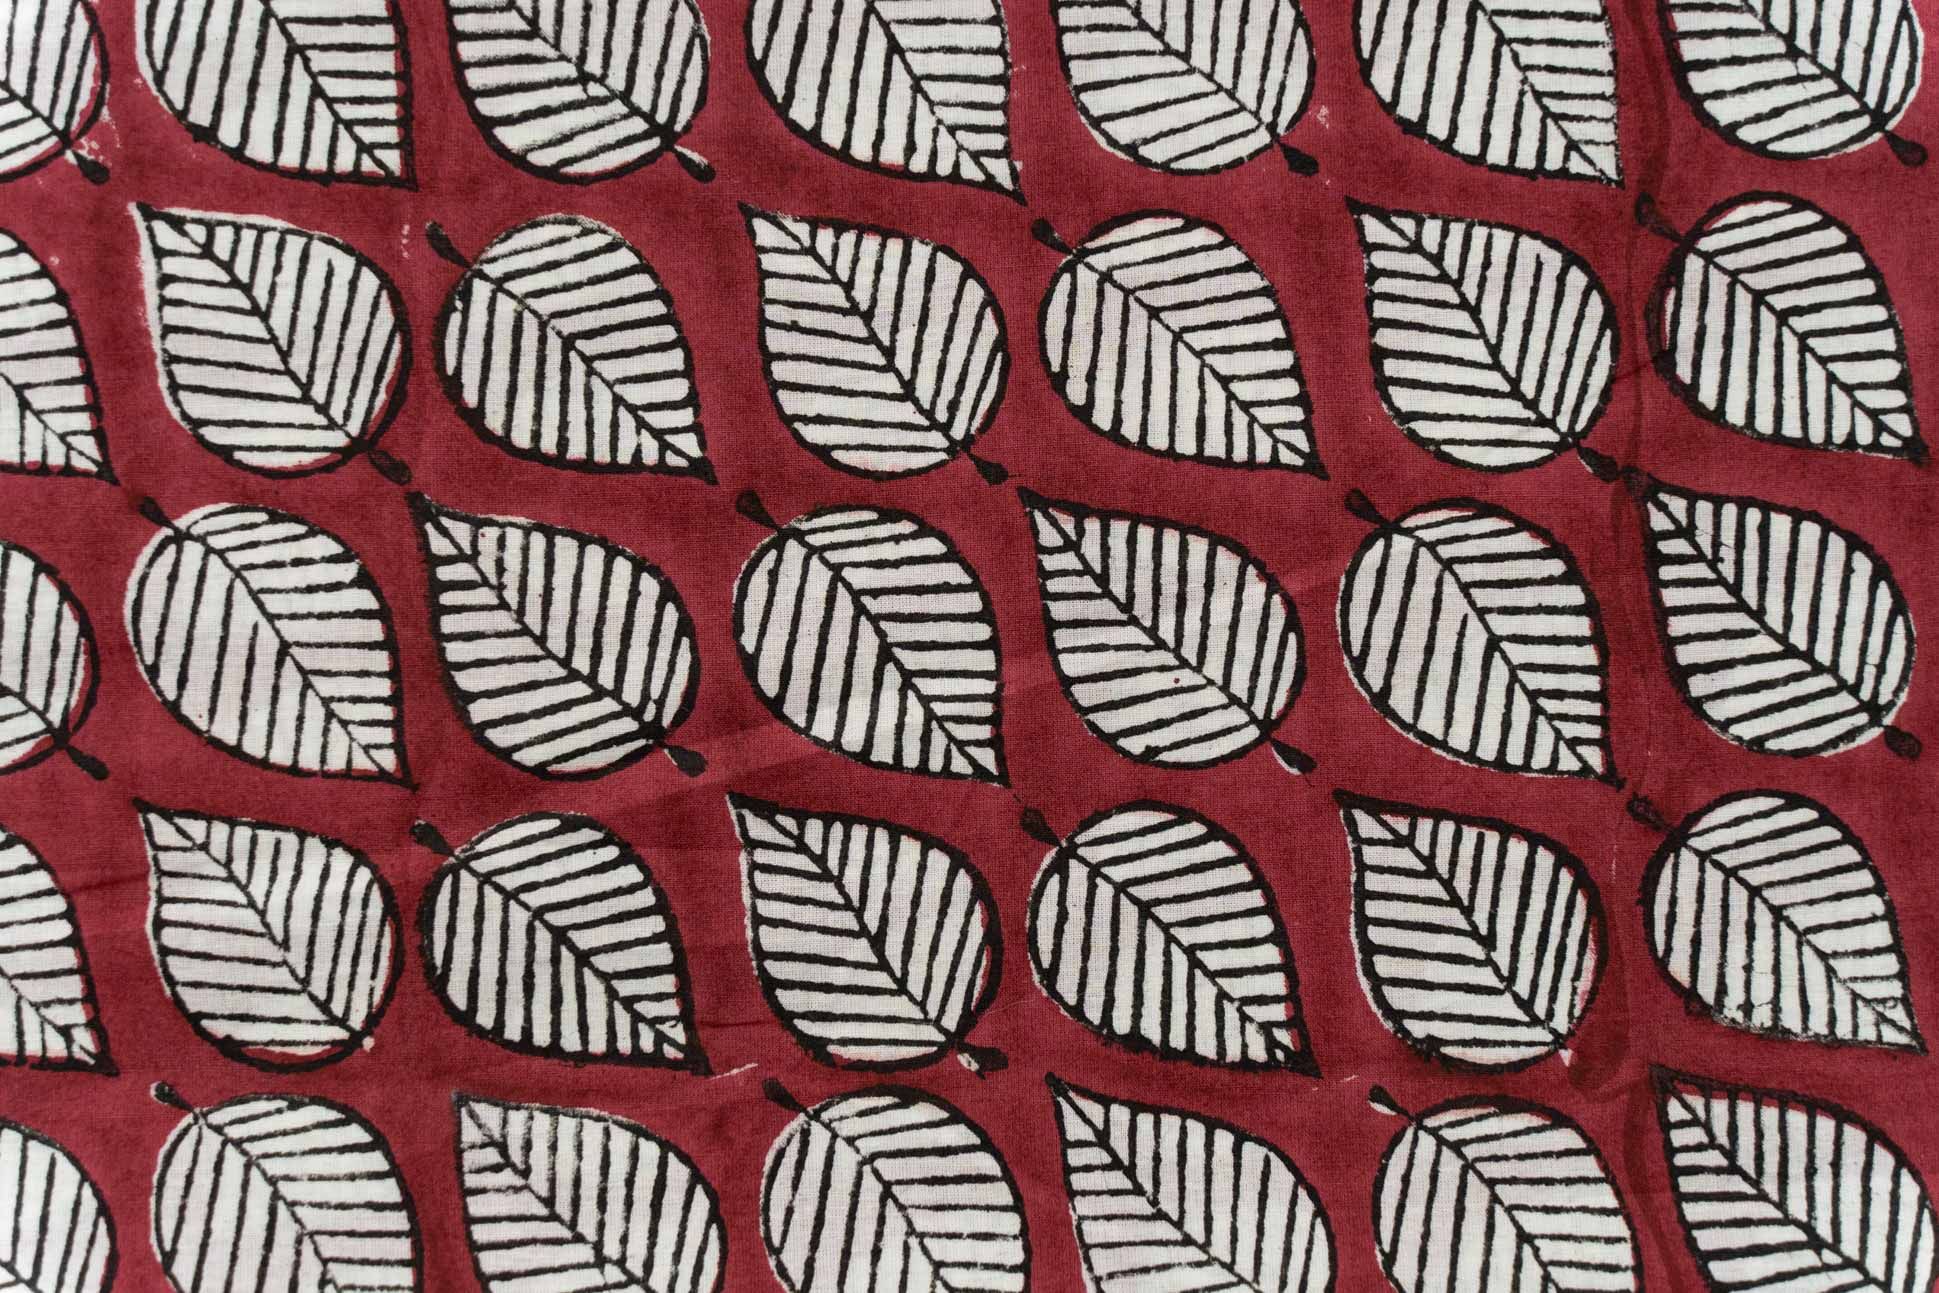 Mary Red Leaf Block Printed Fabric